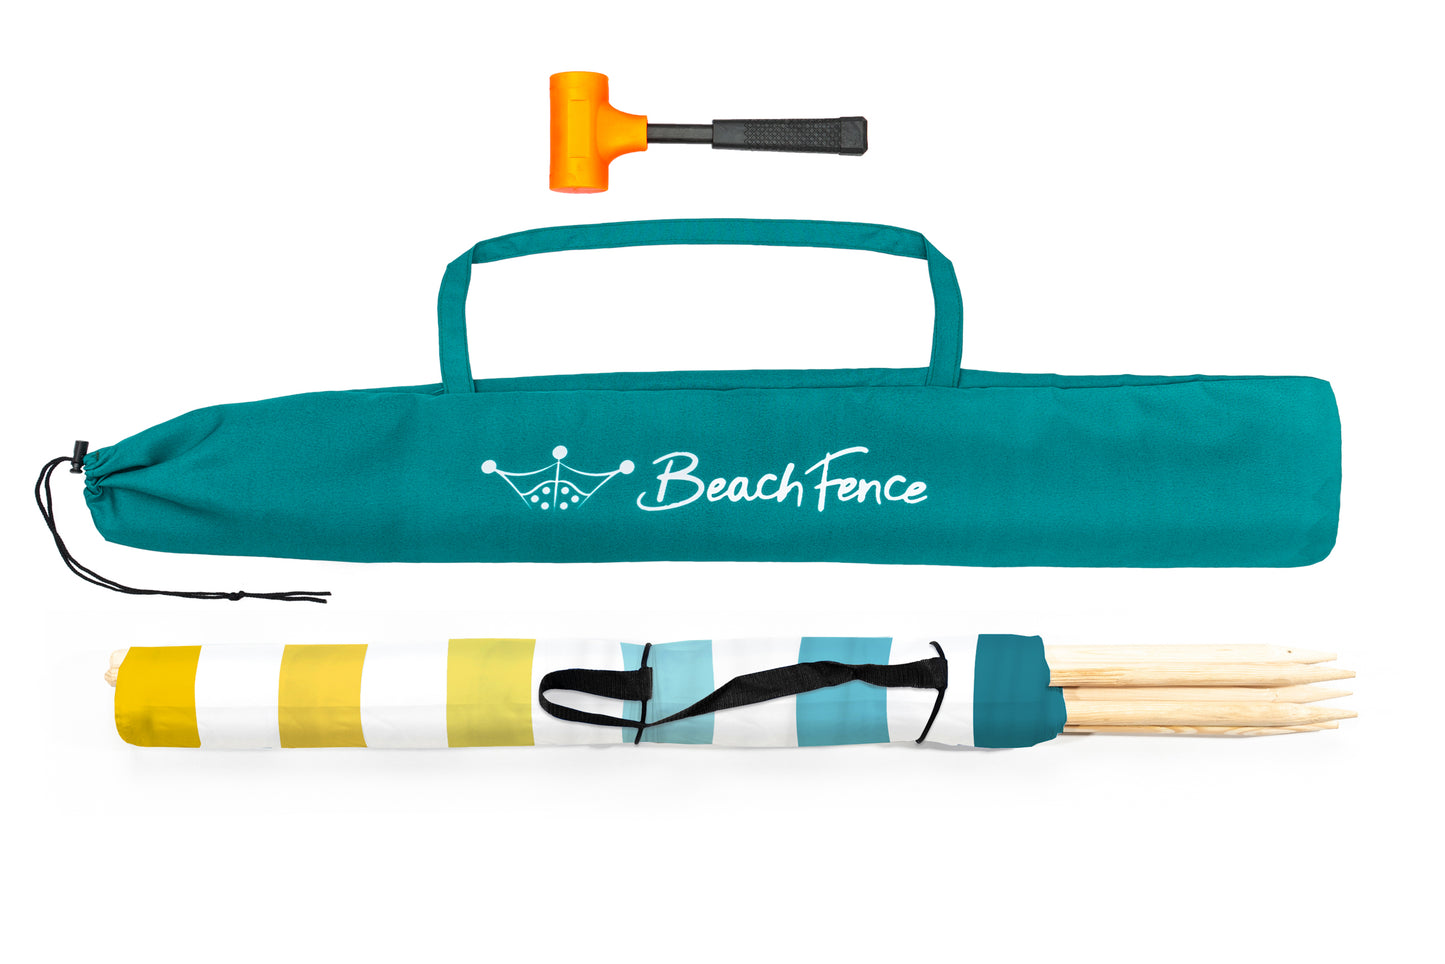 BEACH FENCE 20 ft Premium Beach Windscreen, Privacy Screen, Wind Blocker - Tahitian Sunset, Free Rubber Mallet and Carry Bag Included